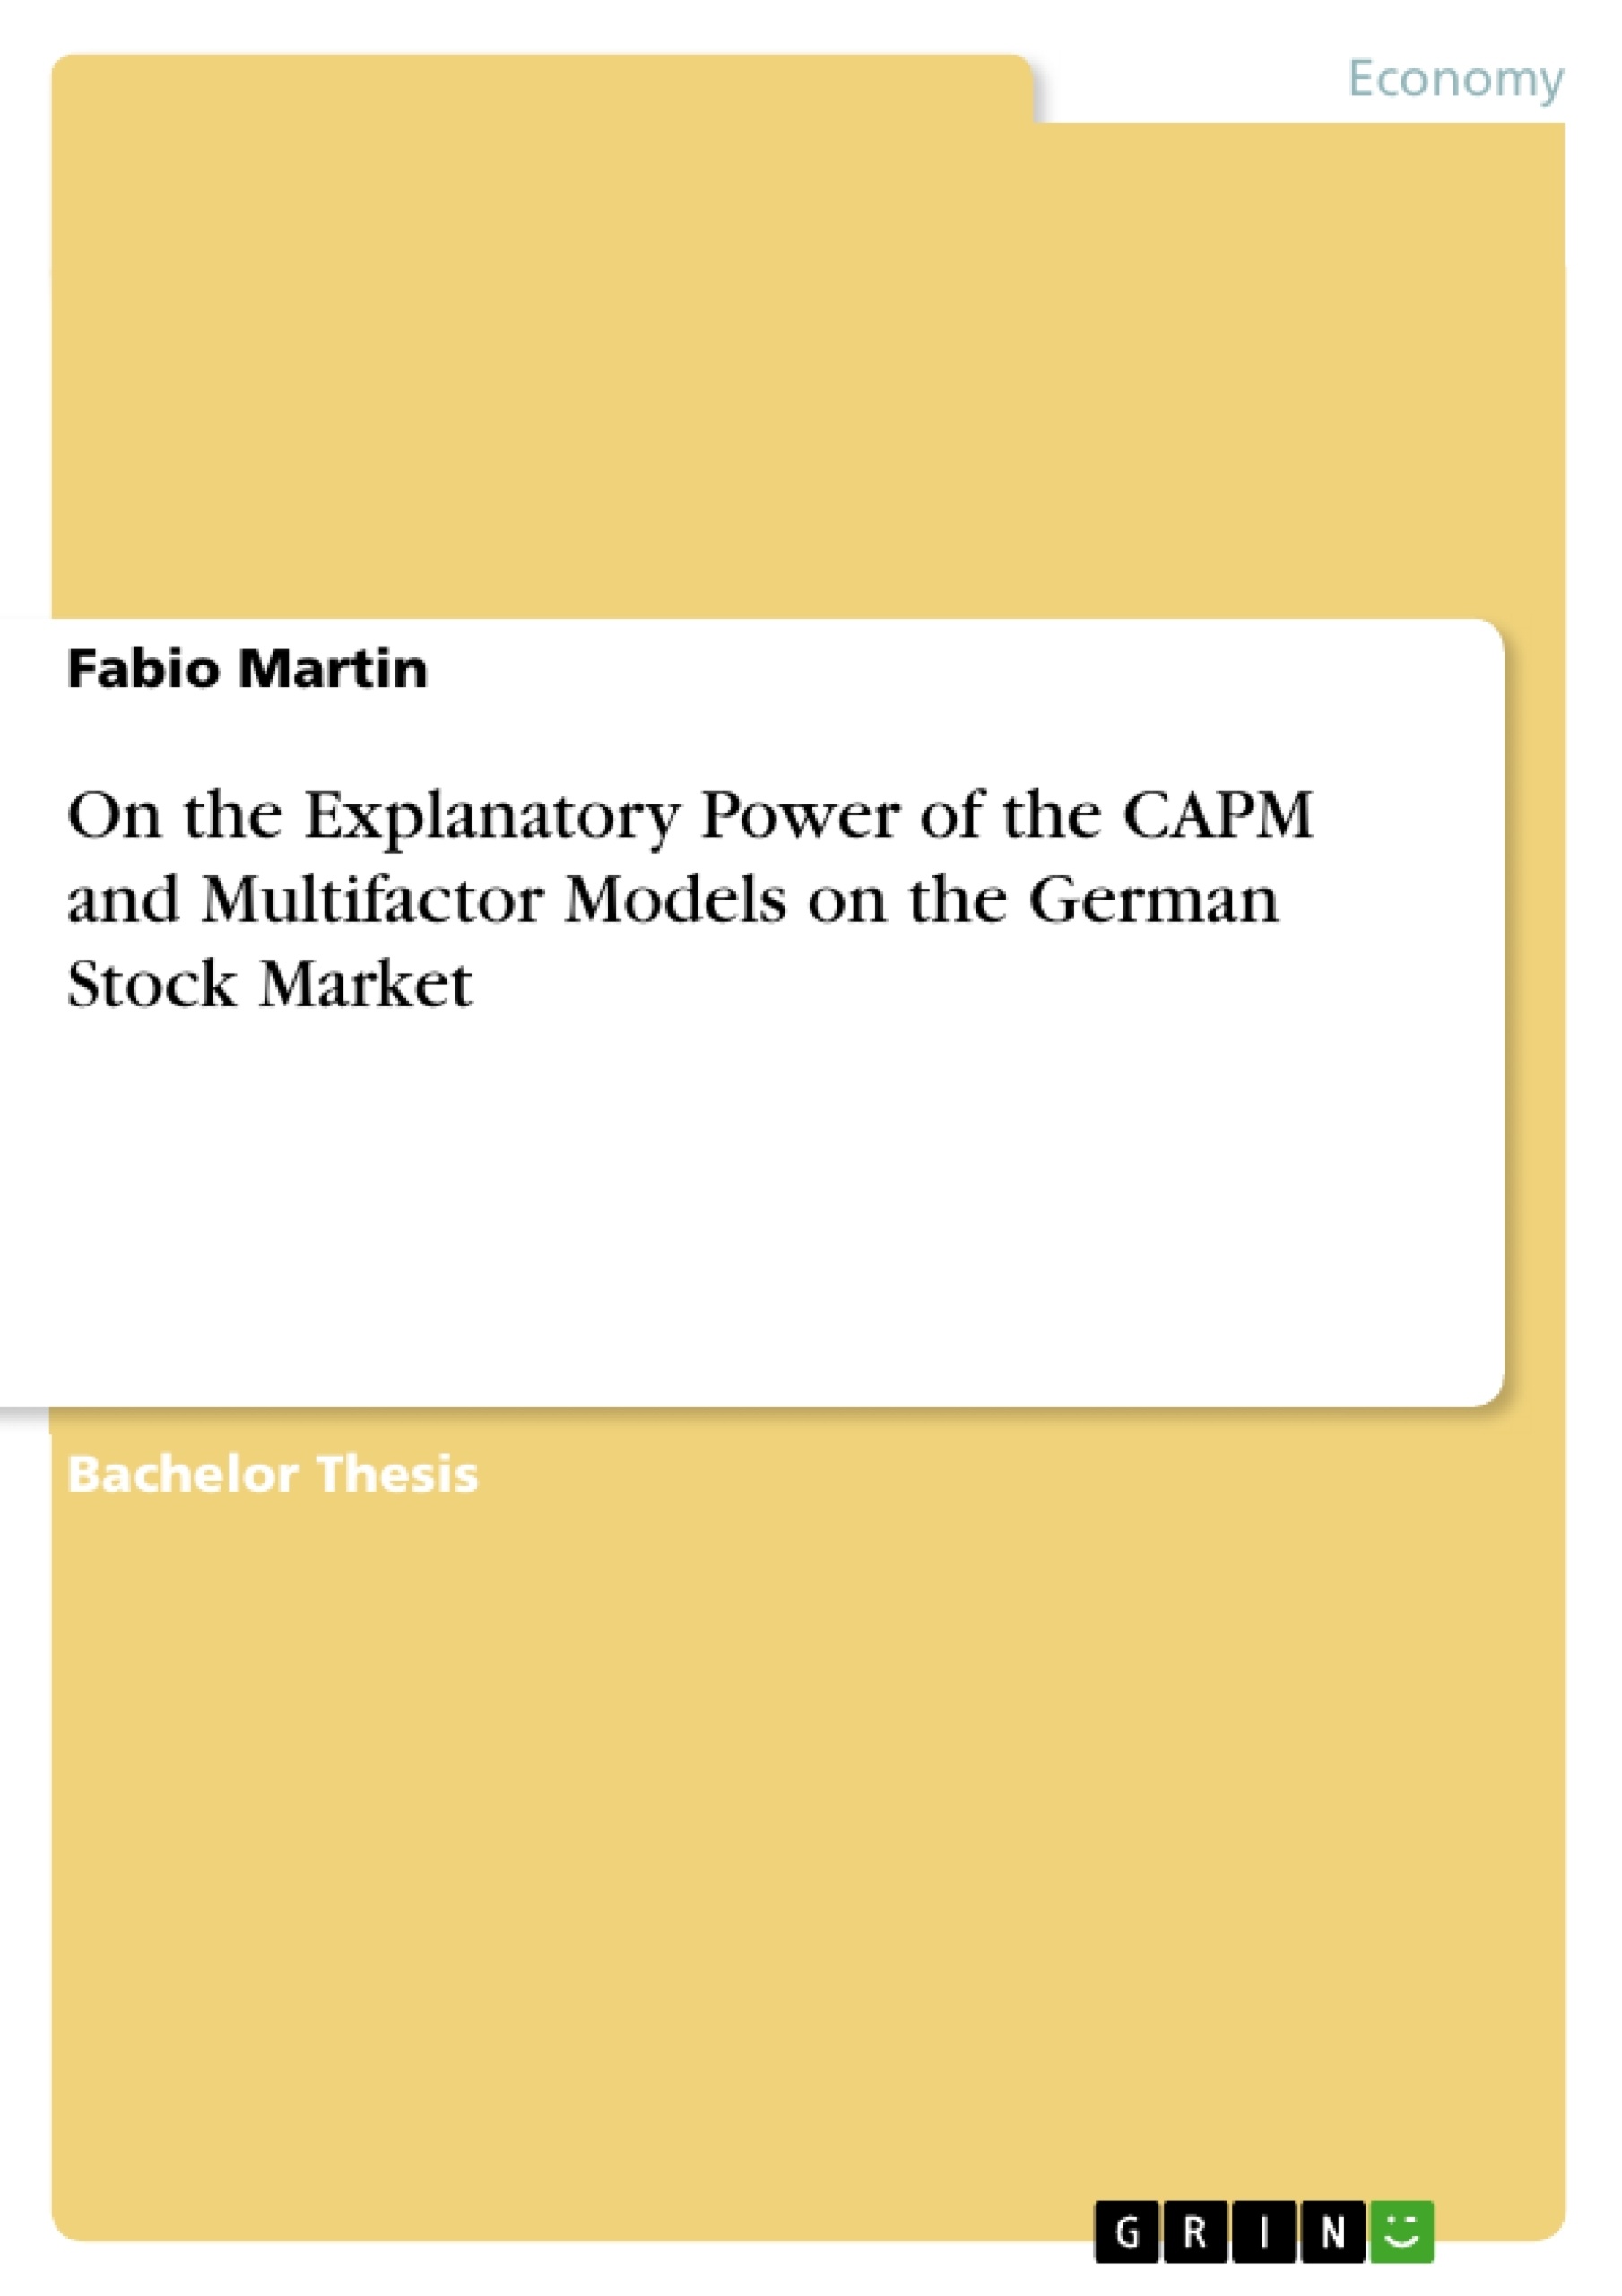 Title: On the Explanatory Power of the CAPM and Multifactor Models on the German Stock Market